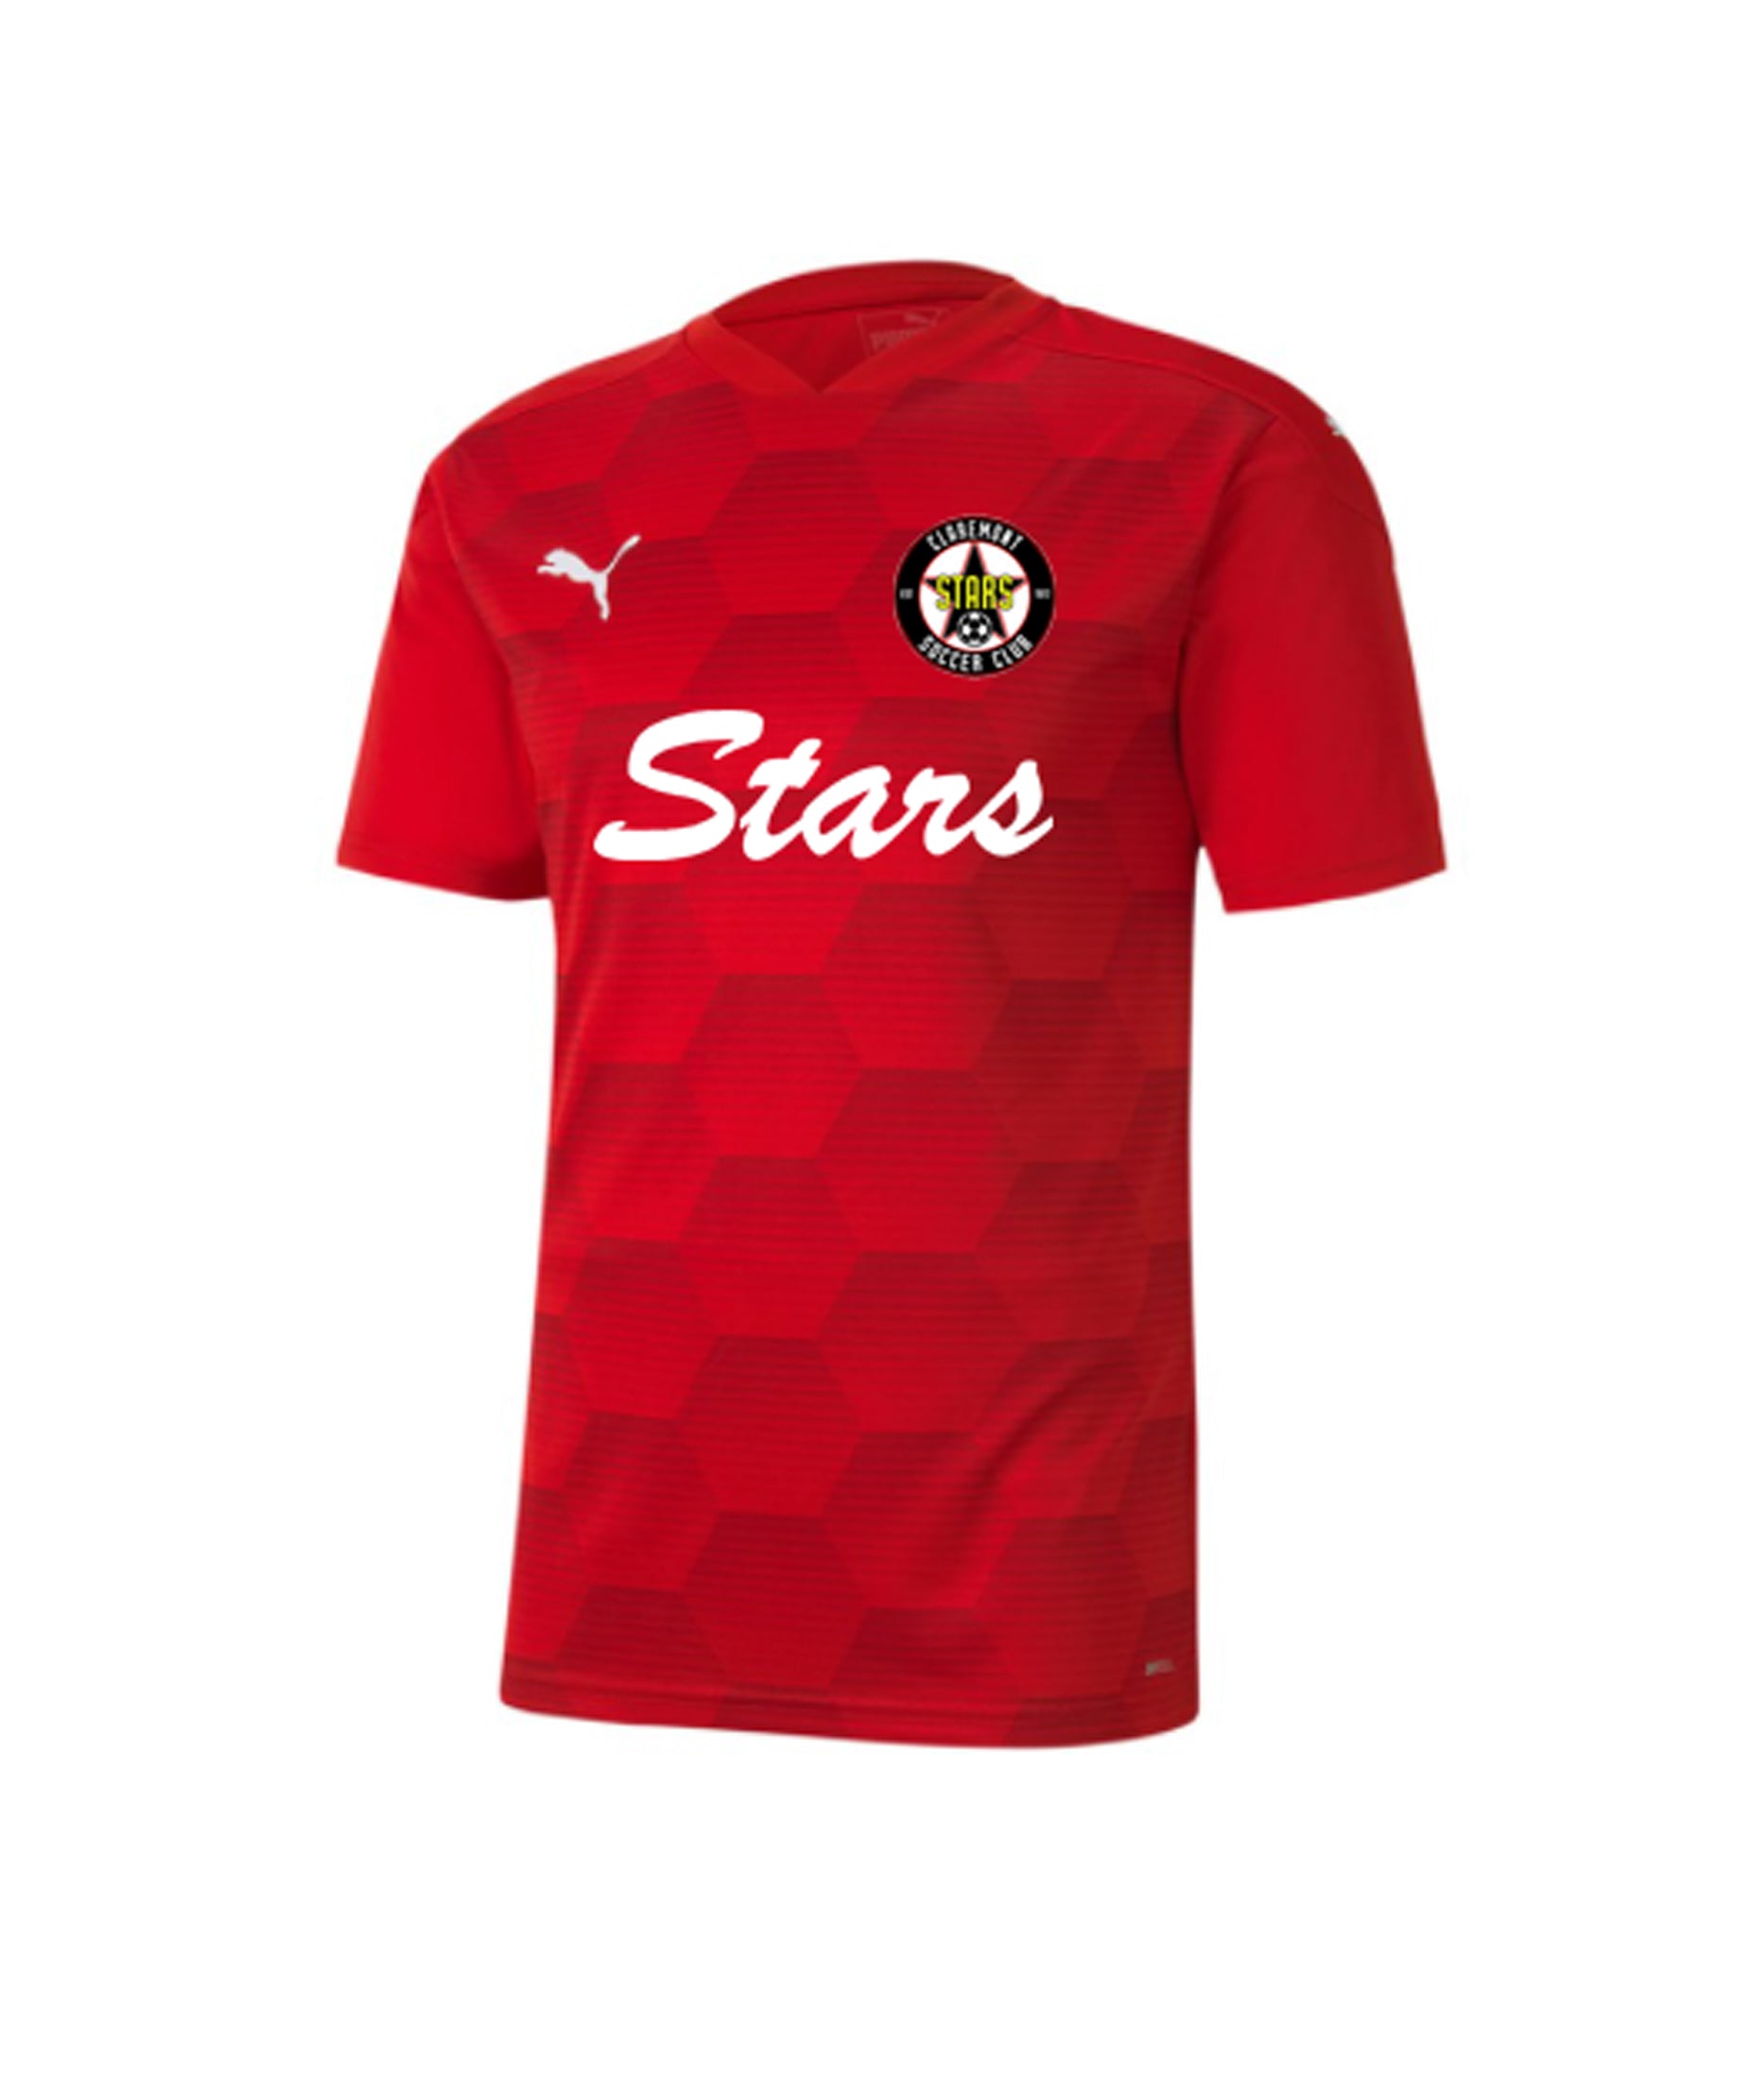 CLAREMONT STARS YOUTH JERSEY - PUMA TEAM FINAL 21 GRAPHIC